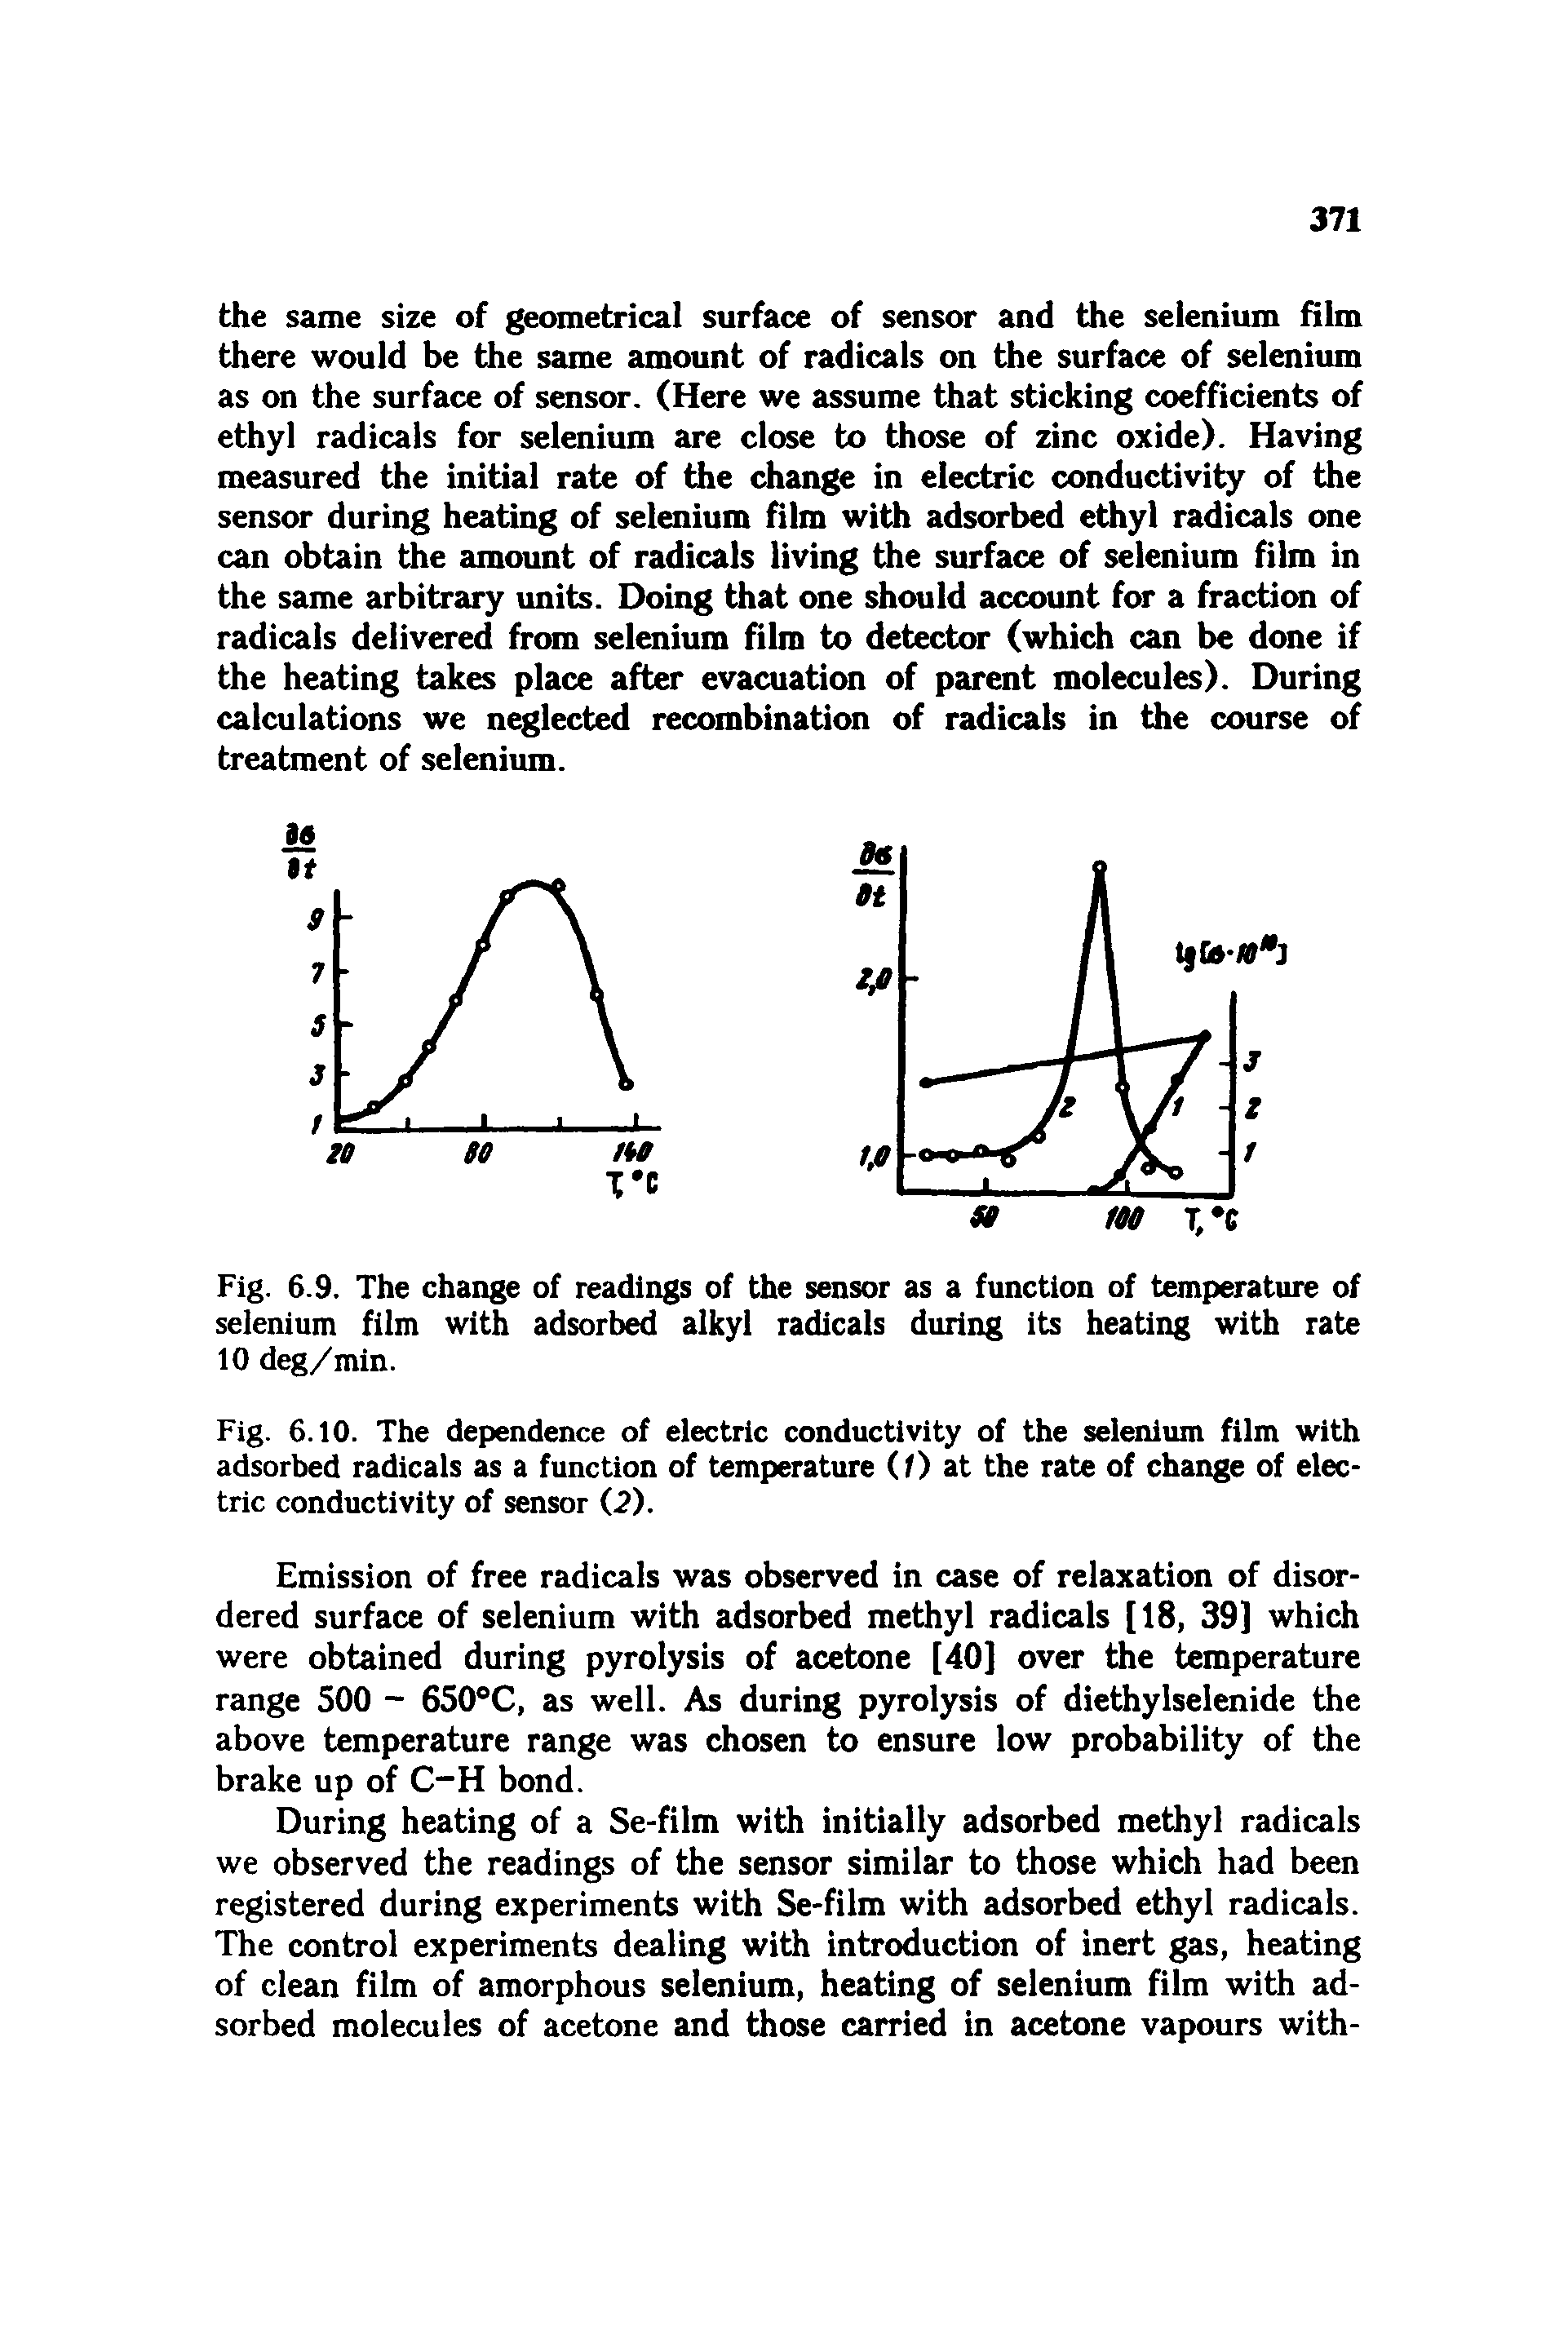 Fig. 6.9. The change of readings of the sensor as a function of temperature of selenium film with adsorbed alkyl radicals during its heating with rate 10 deg/min.